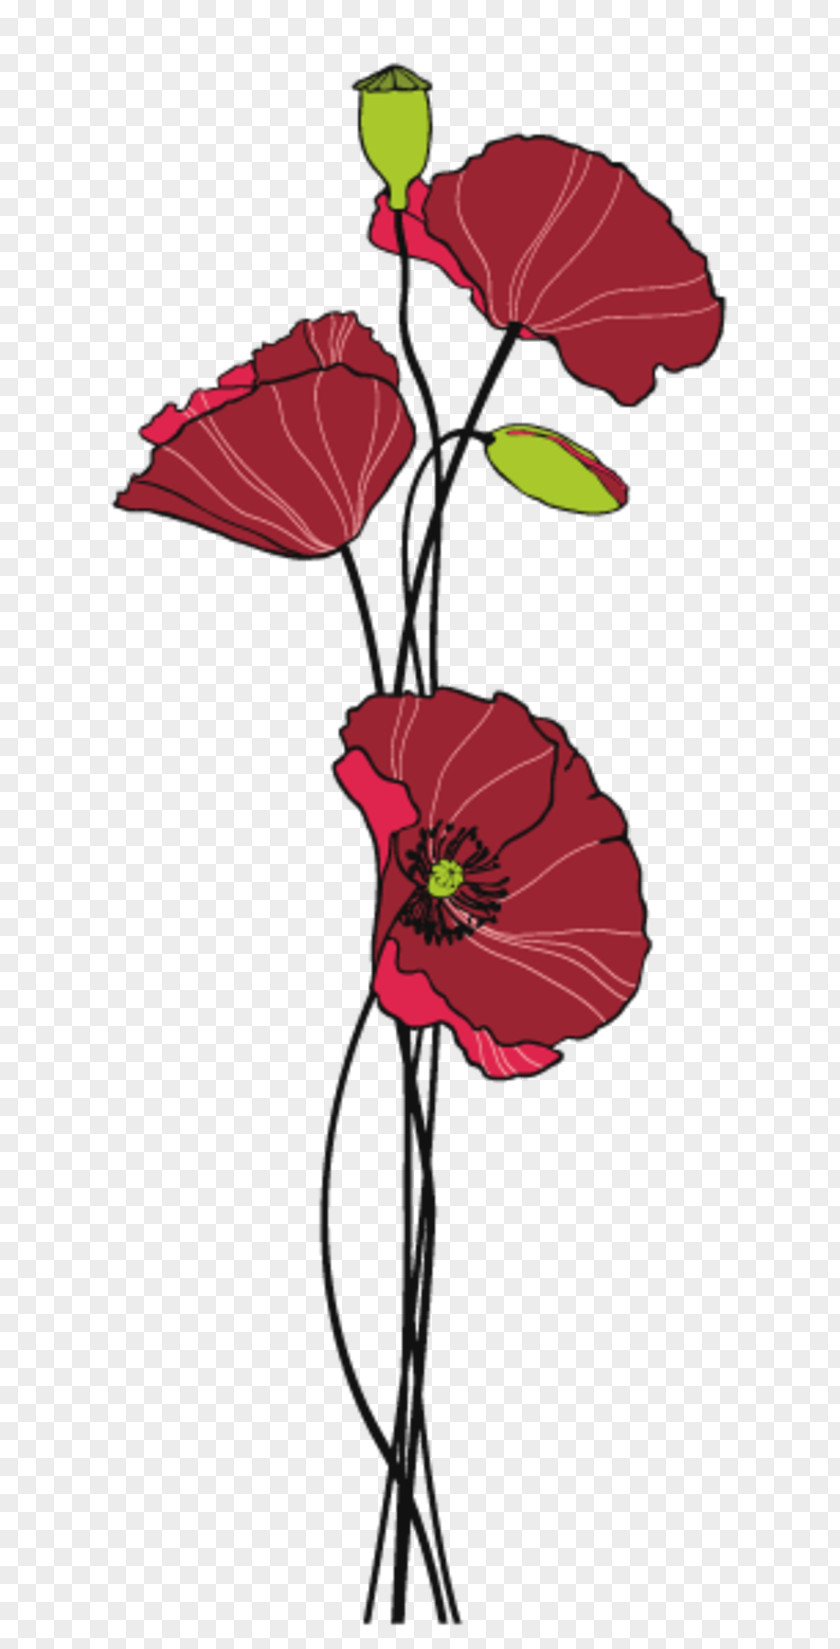 Flower Sticker Painting Common Poppy Image PNG